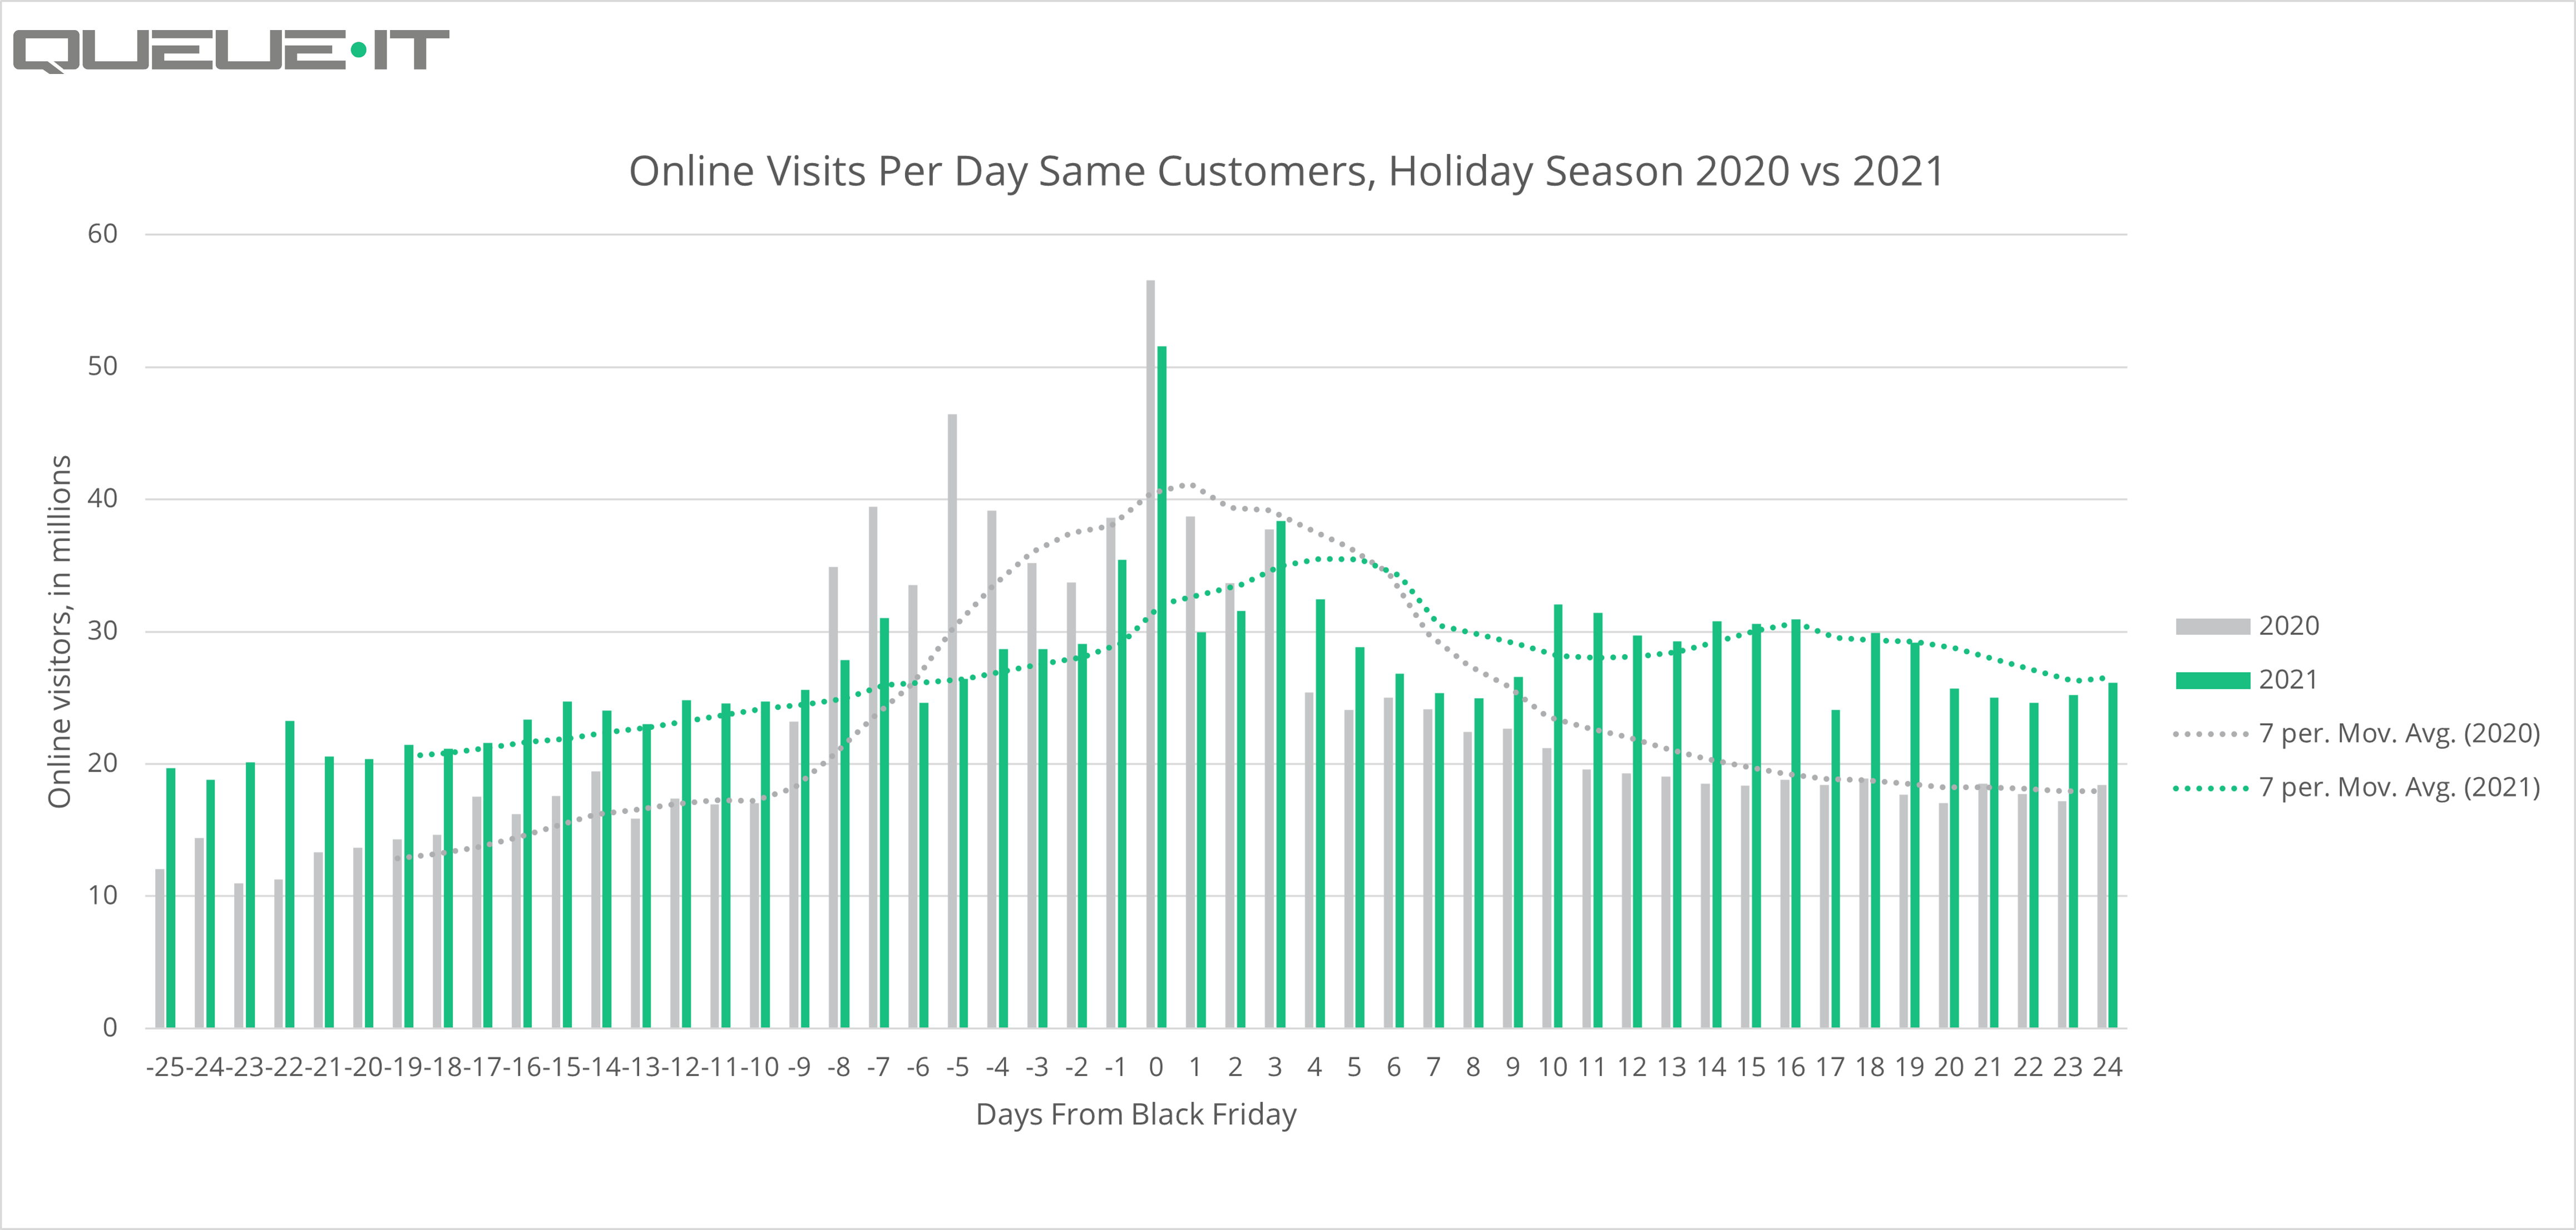 Holiday shopping web traffic 2020 and 2021 7 day moving averages